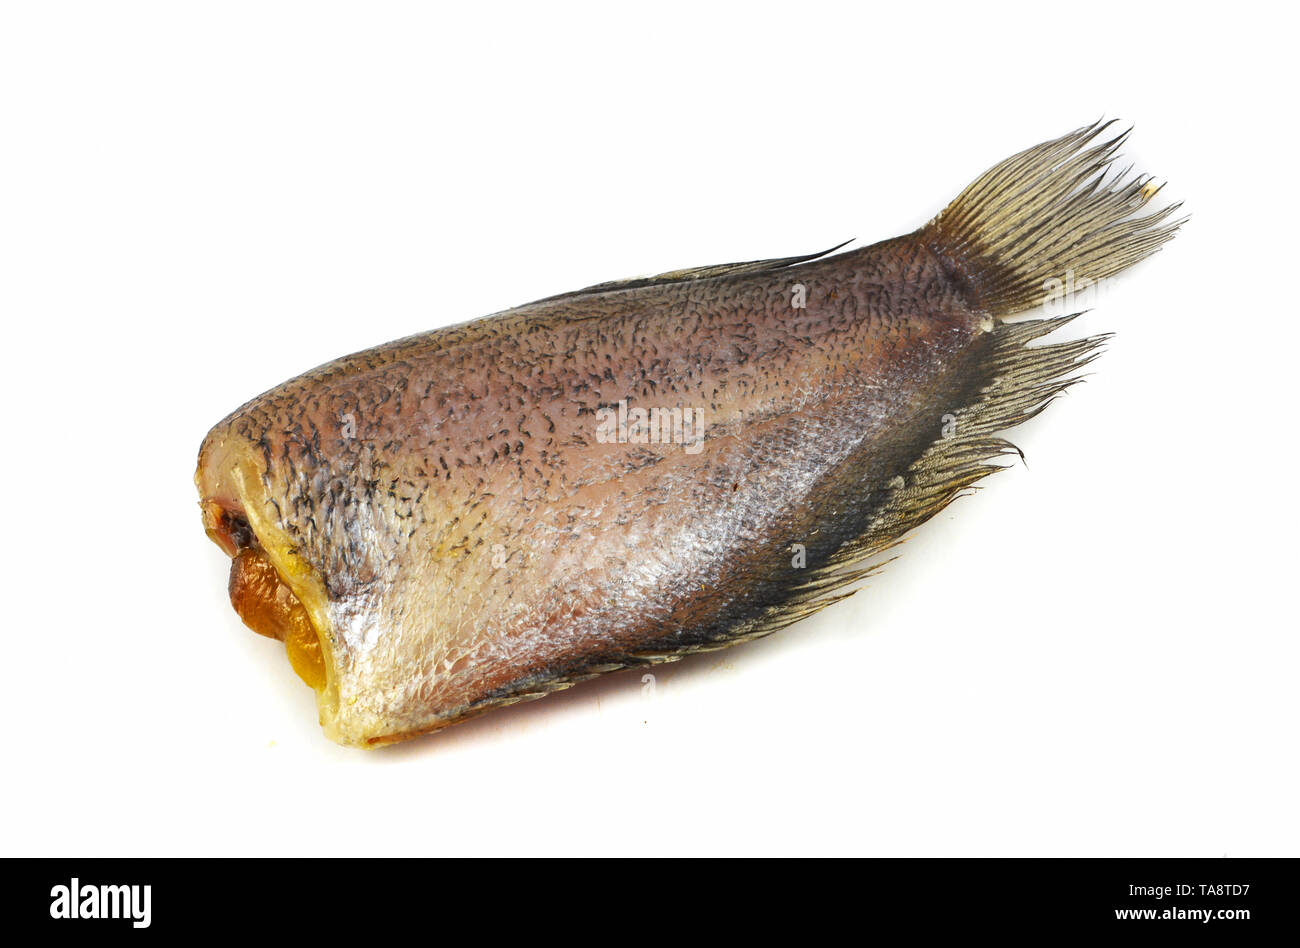 Sun dried fish / trichogaster pectoralis fish dry with spawn isolated on white background Stock Photo